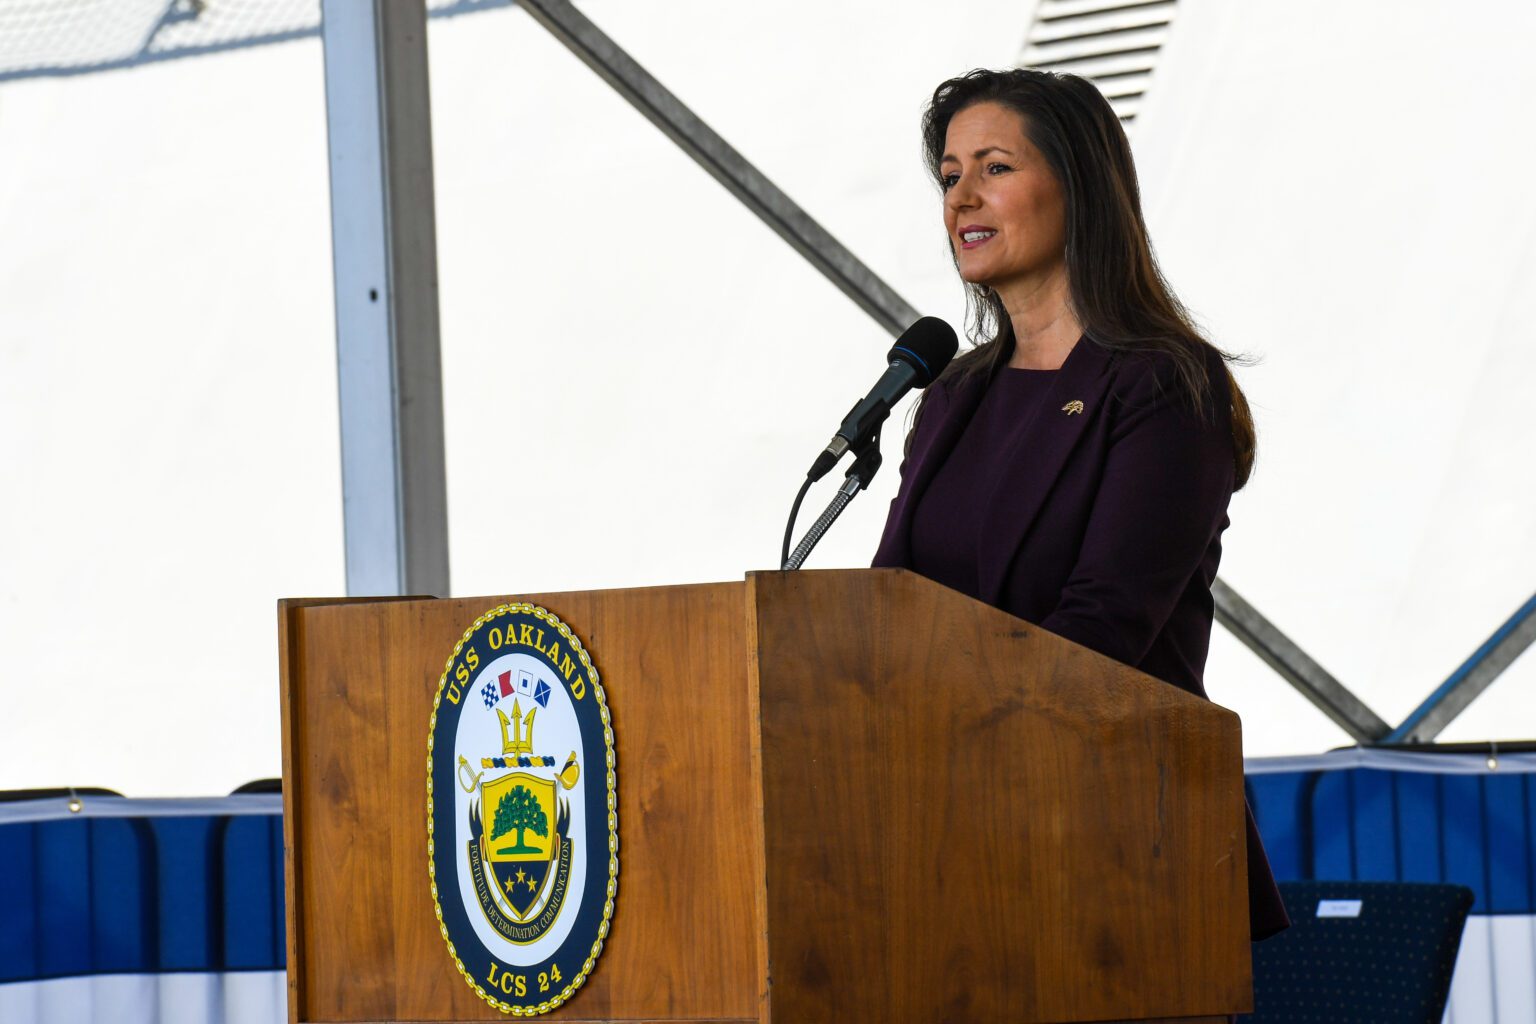 210417-N-YS140-080

Oakland, Calif. (April 17, 2021) Oakland Mayor Libby Schaff provides opening remarks at the USS Oakland (LCS 24) commissioning ceremony. The LCS is a fast, agile, mission-focused platform designed to operate in near-shore environments, while capable of open ocean tasking. The LCS can support forward presence, maritime security, sea control, and deterrence. Oakland will be homeported San Diego. (U.S. Navy photo by Chief Mass Communication Specialist John Pearl)